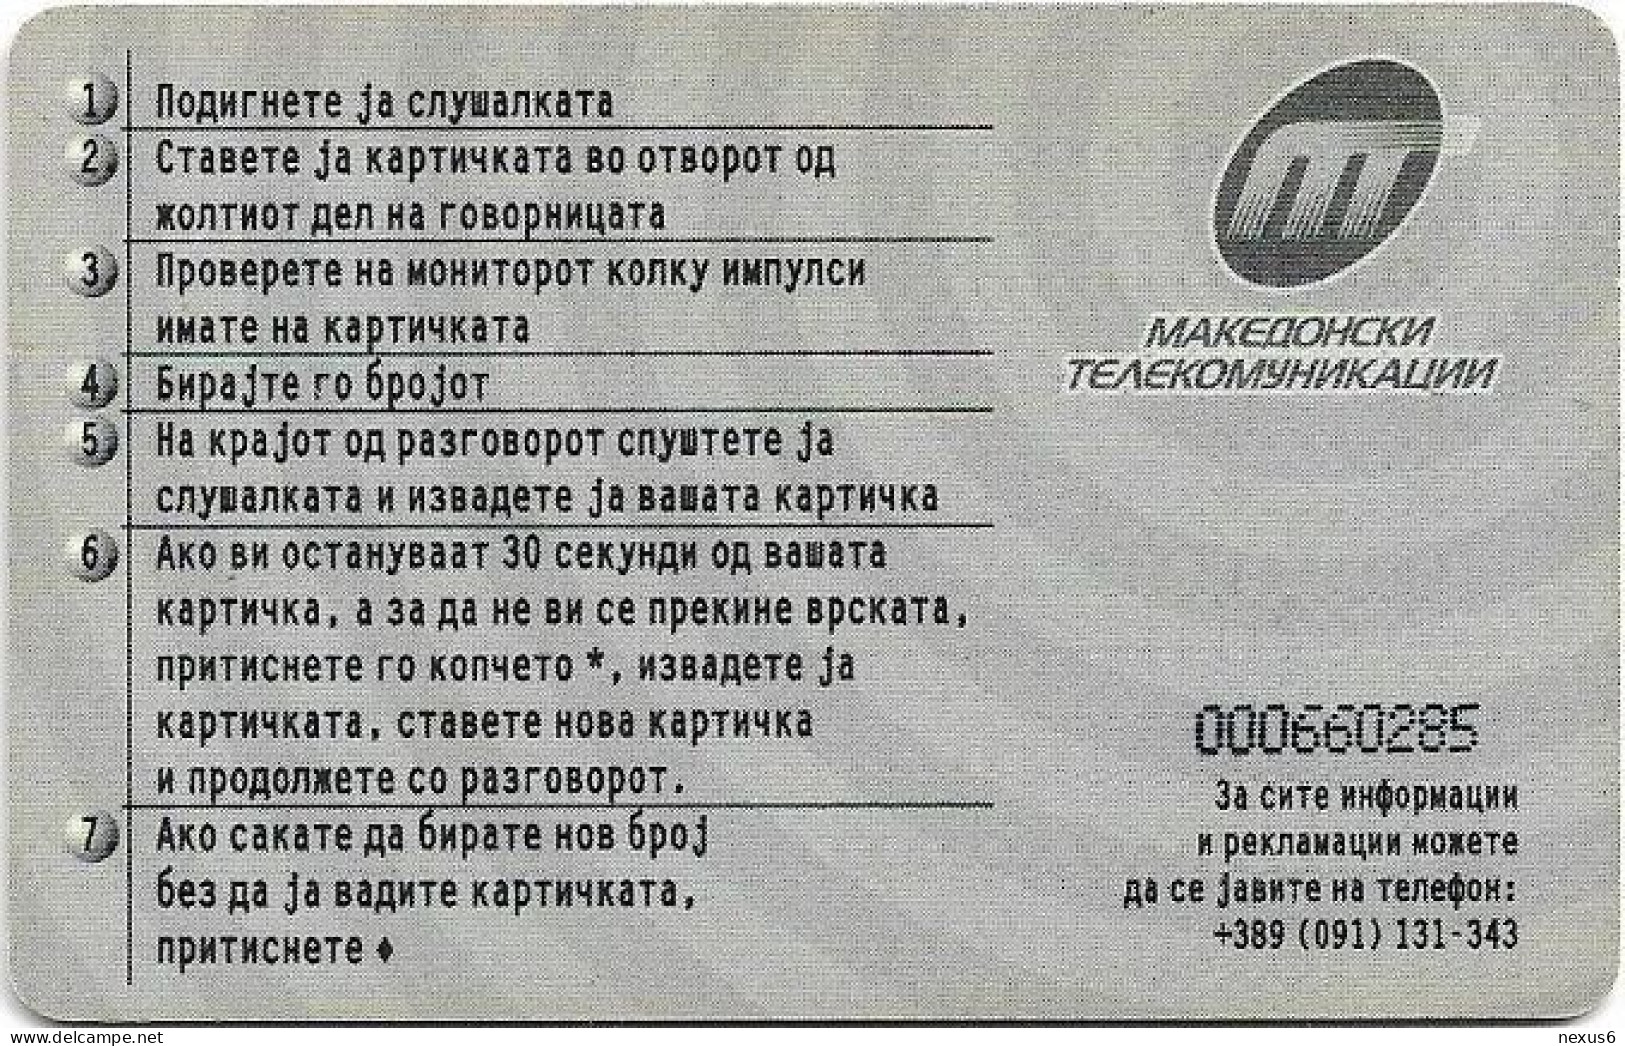 Macedonia - MT - Butterfly & Instructions, Chip Siemens S30, 12.1998, 500U, 15.000ex, Used - Macedonia Del Norte